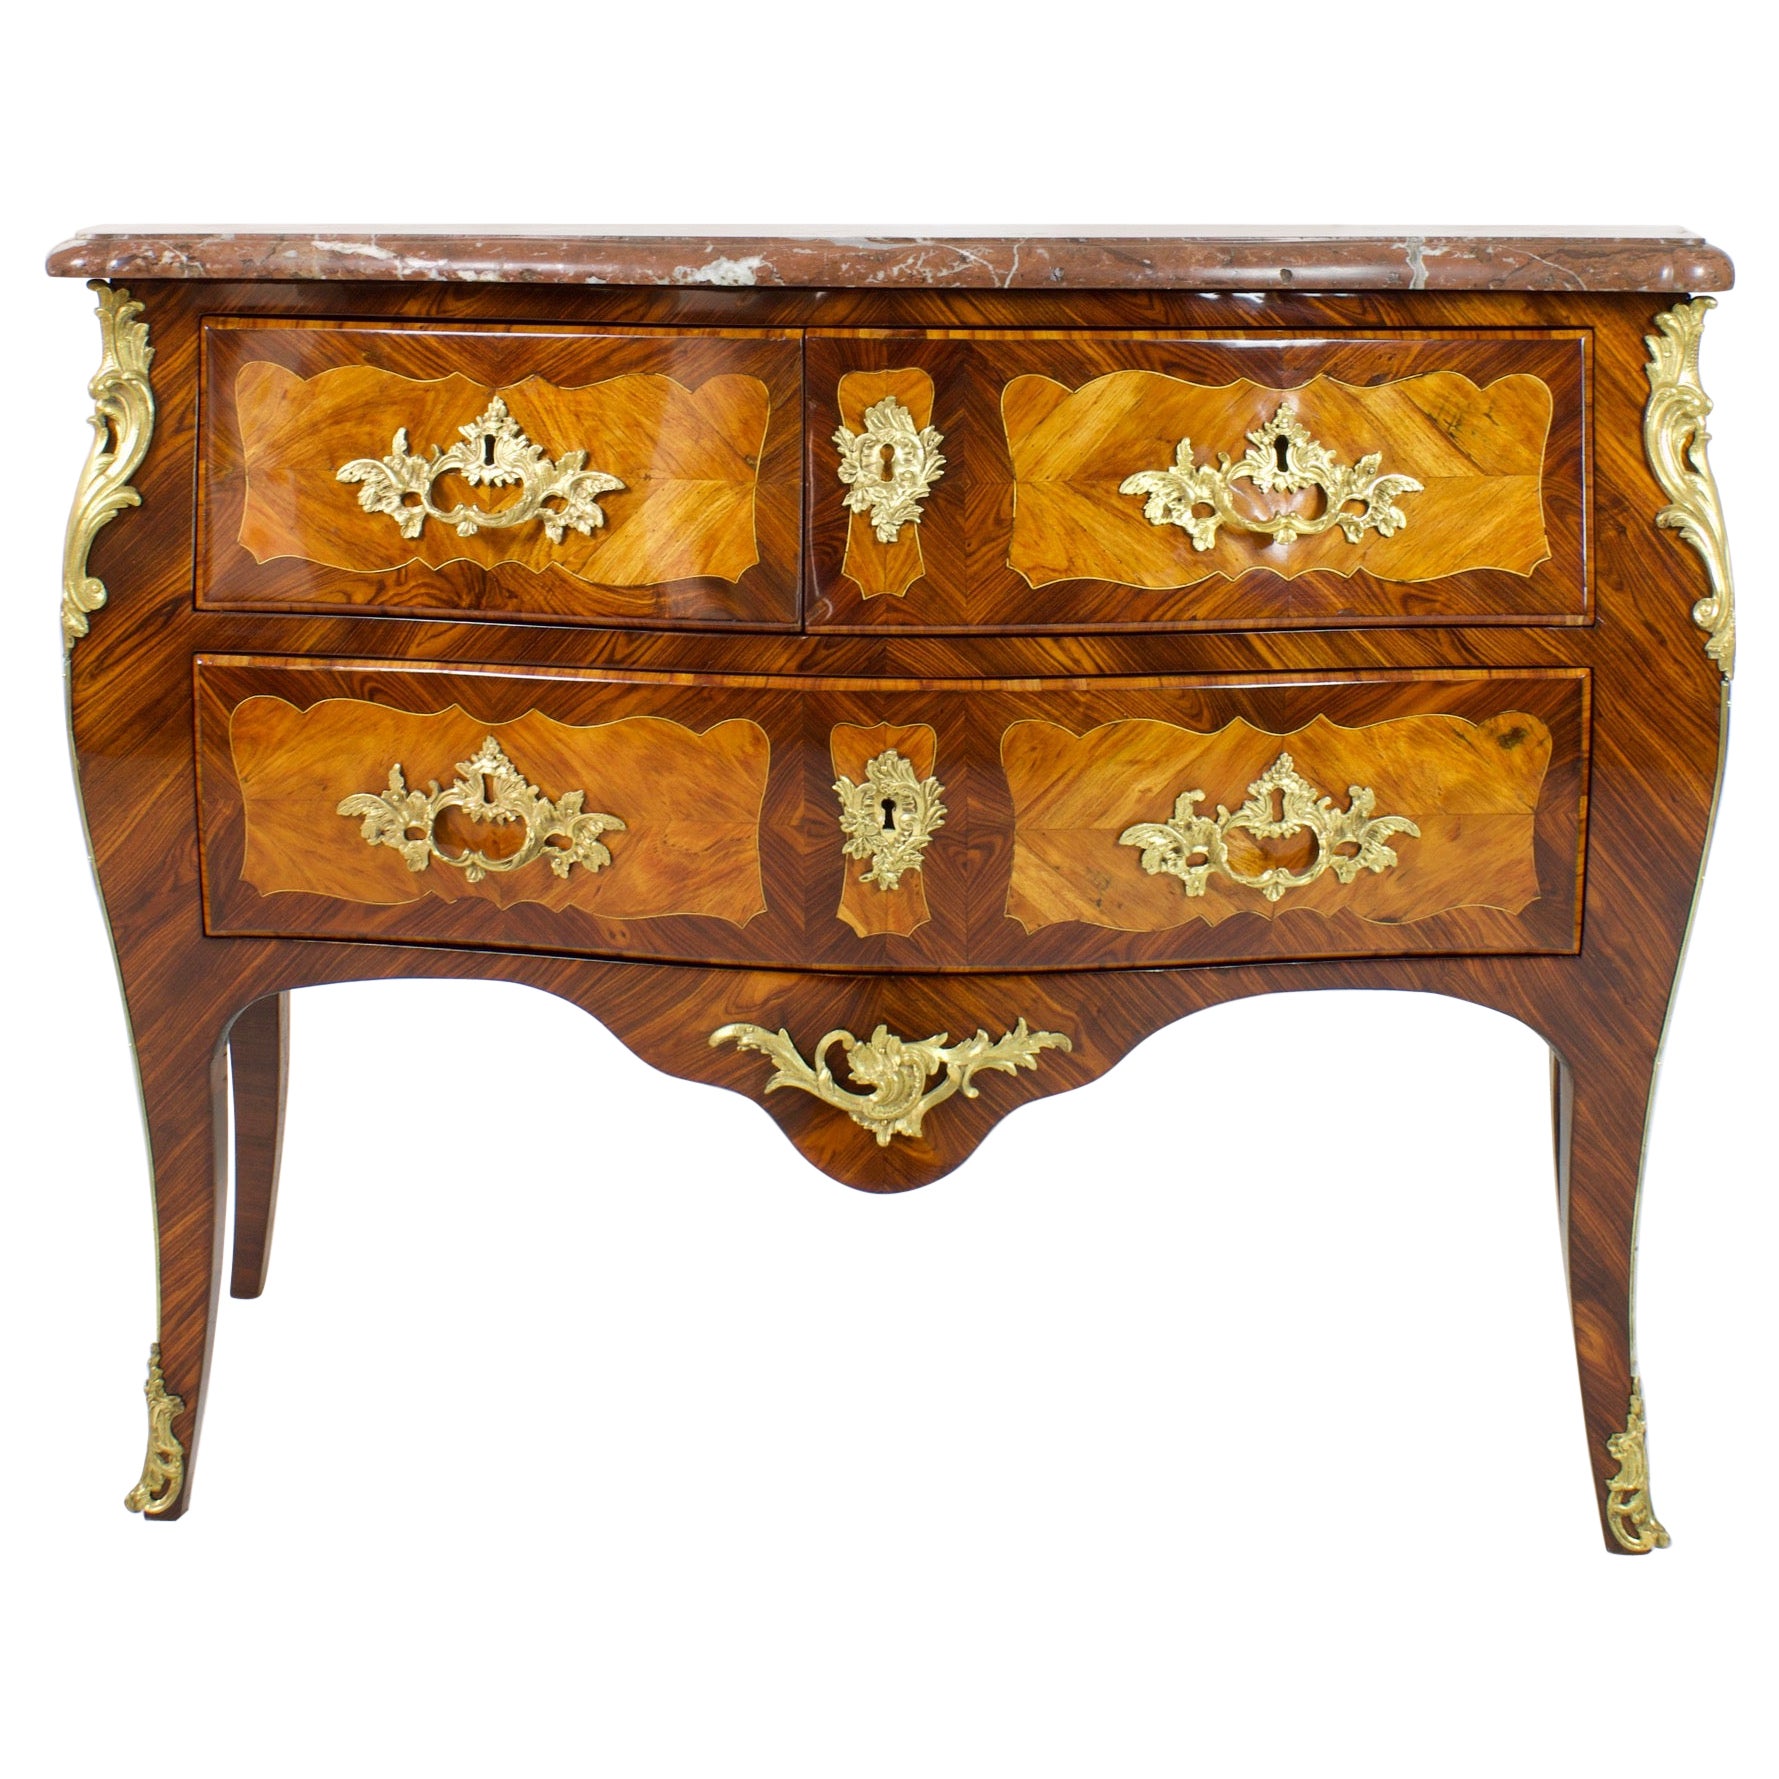 18th Century Louis XV Marquetry Commode or Sauteuse, Stamped "P.ROUSSEL" For Sale